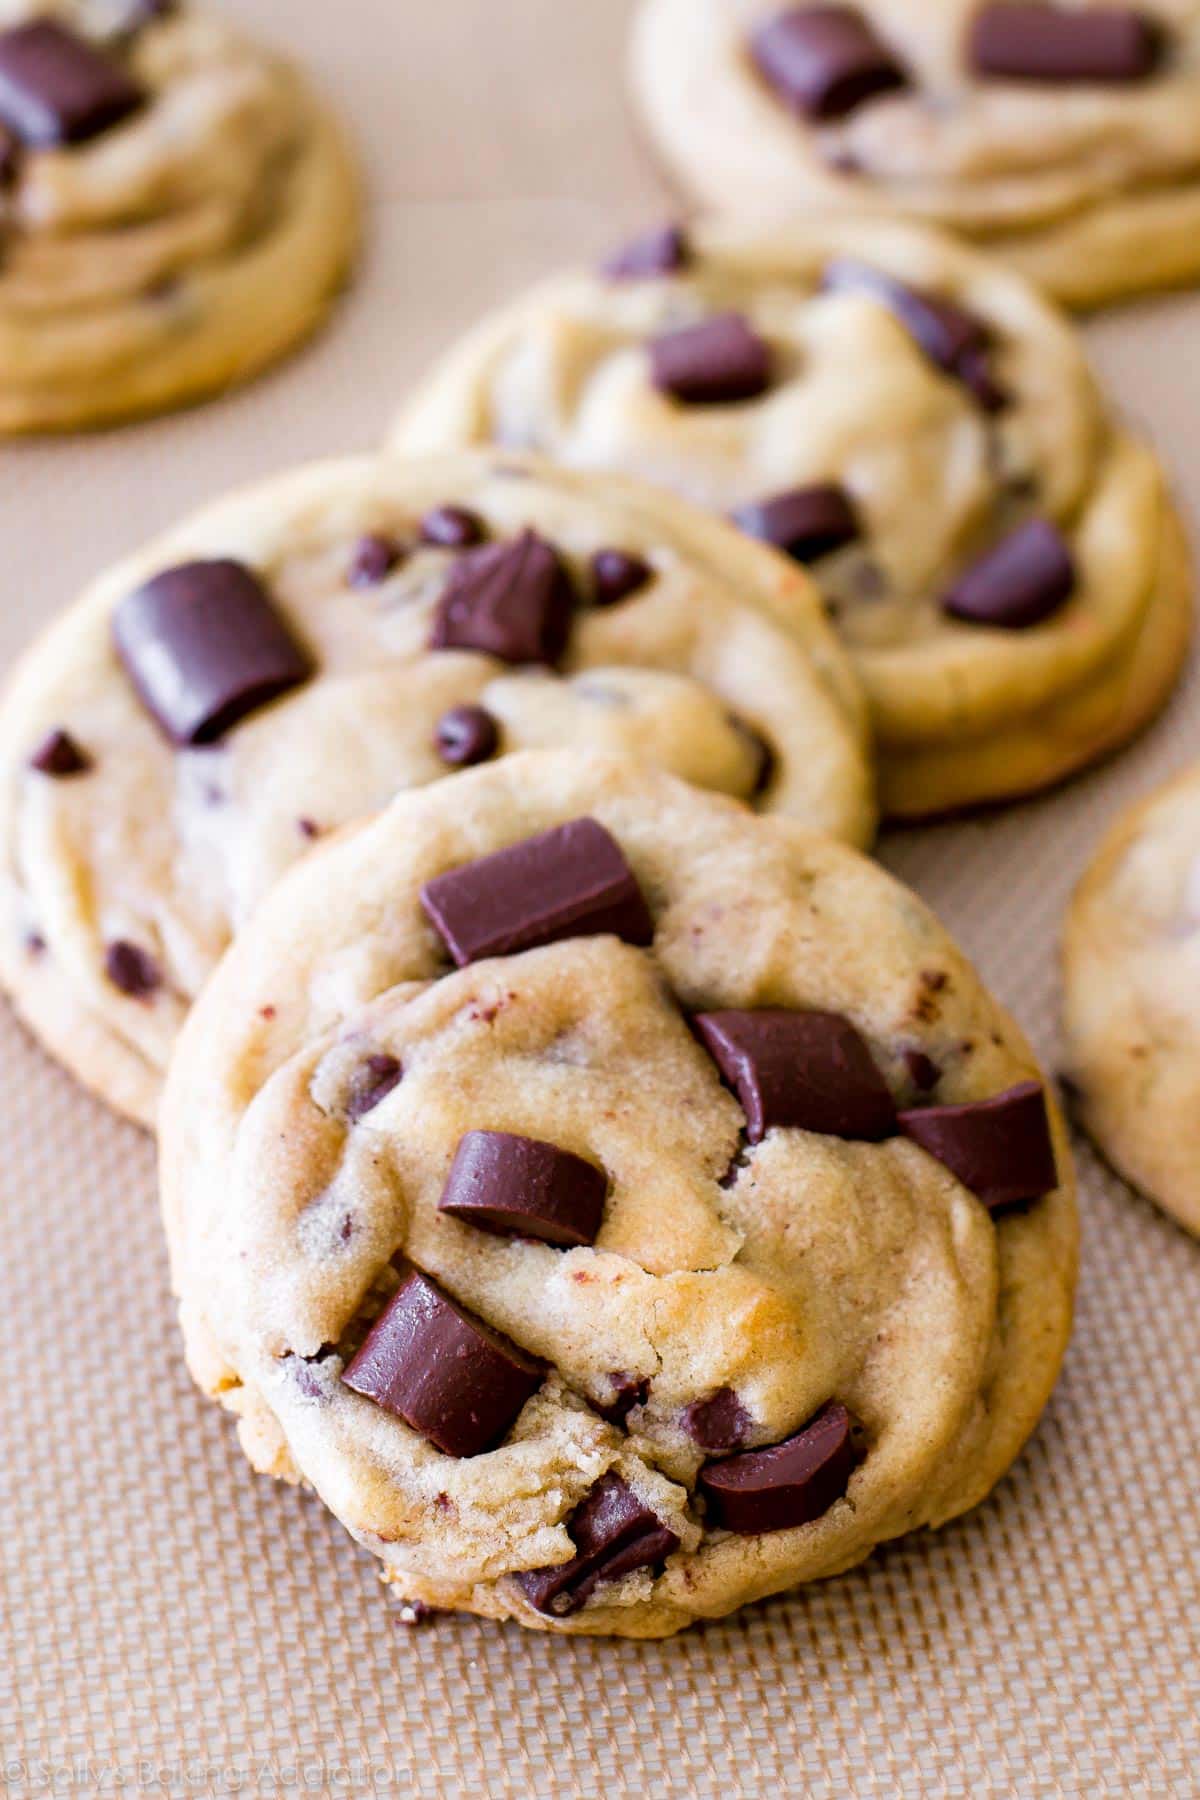 Chocolate chip cookies on a baking sheet